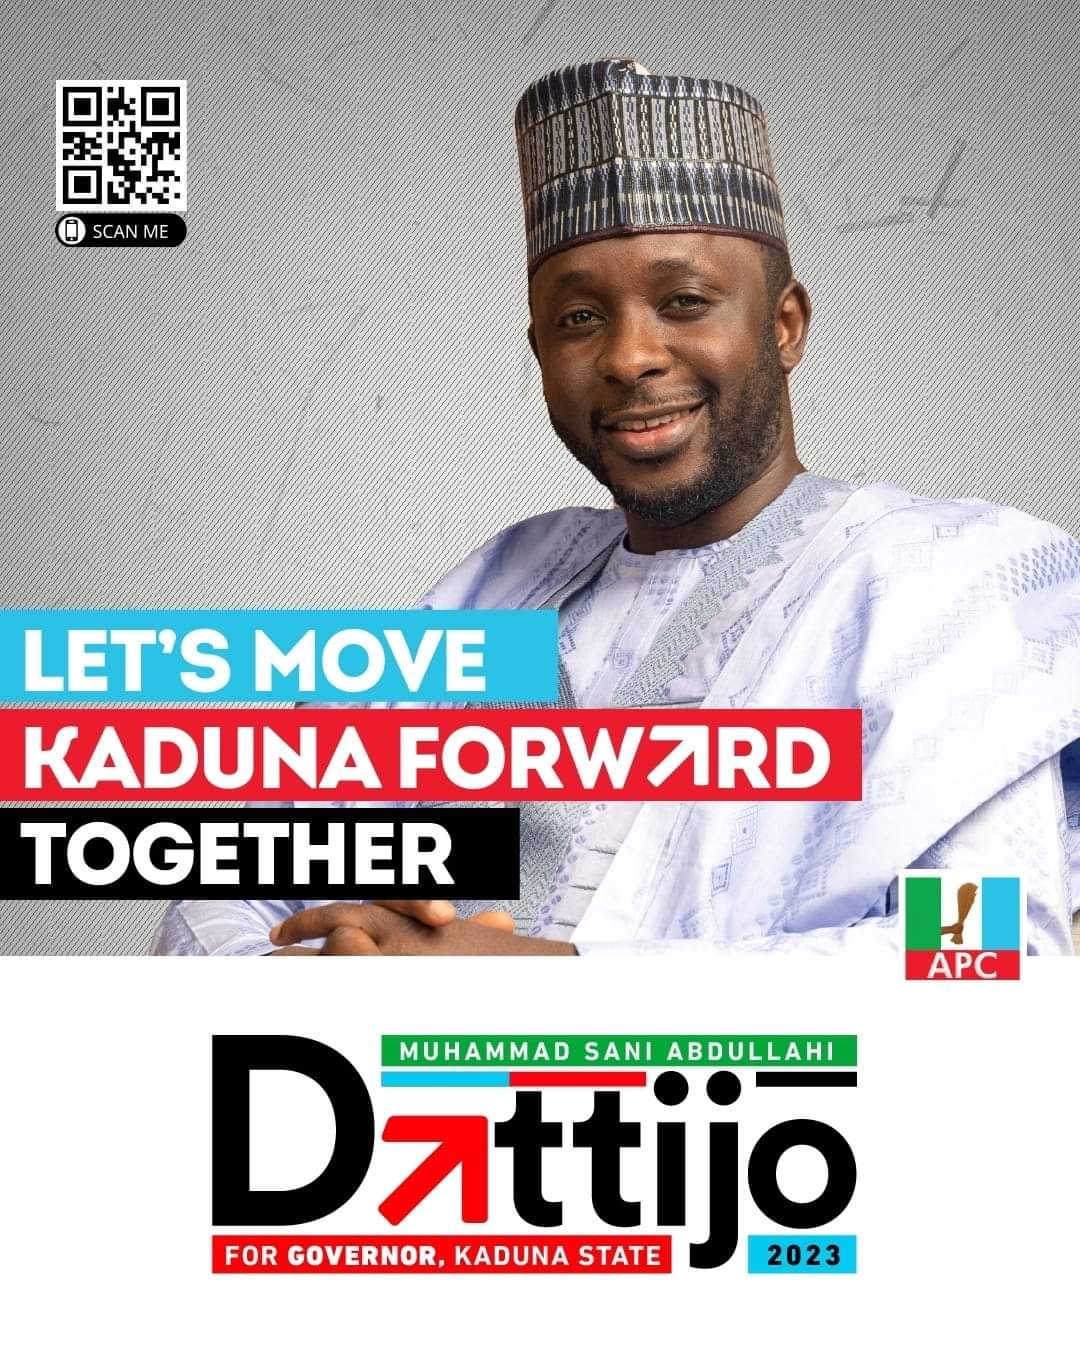 Mm Umar Muhammad Sani Abdullahi Dattijo Just Officially Declared To Contest The Seat Of Kaduna State Governor Dattijo Served As A Policy Adviser At The Executive Office Of United Nations Secretary